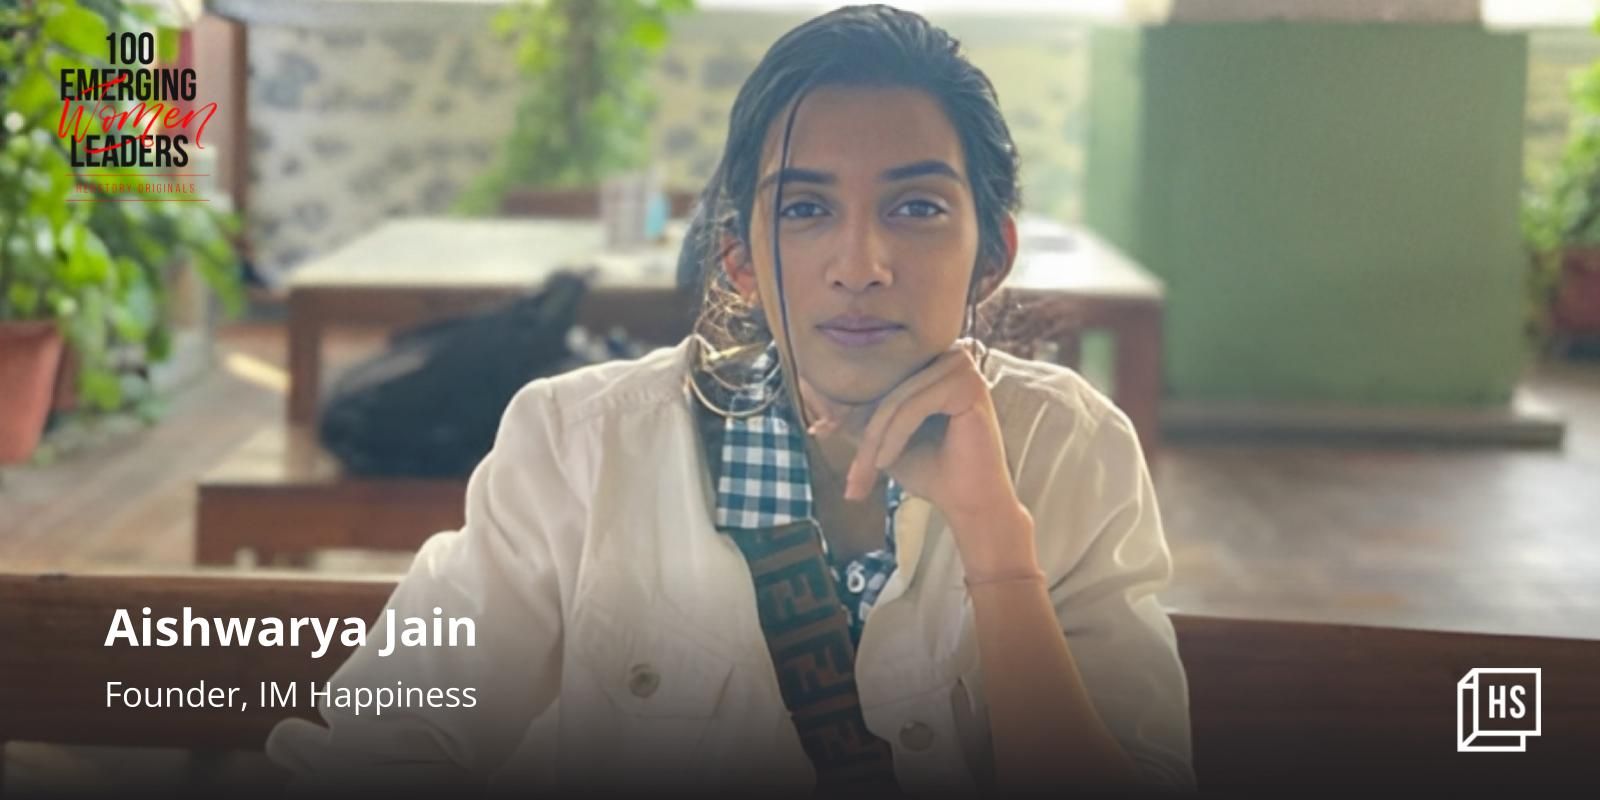 [100 Emerging Women Leaders] How Aishwarya Jain is making mental well-being support more accessible and inclusive
